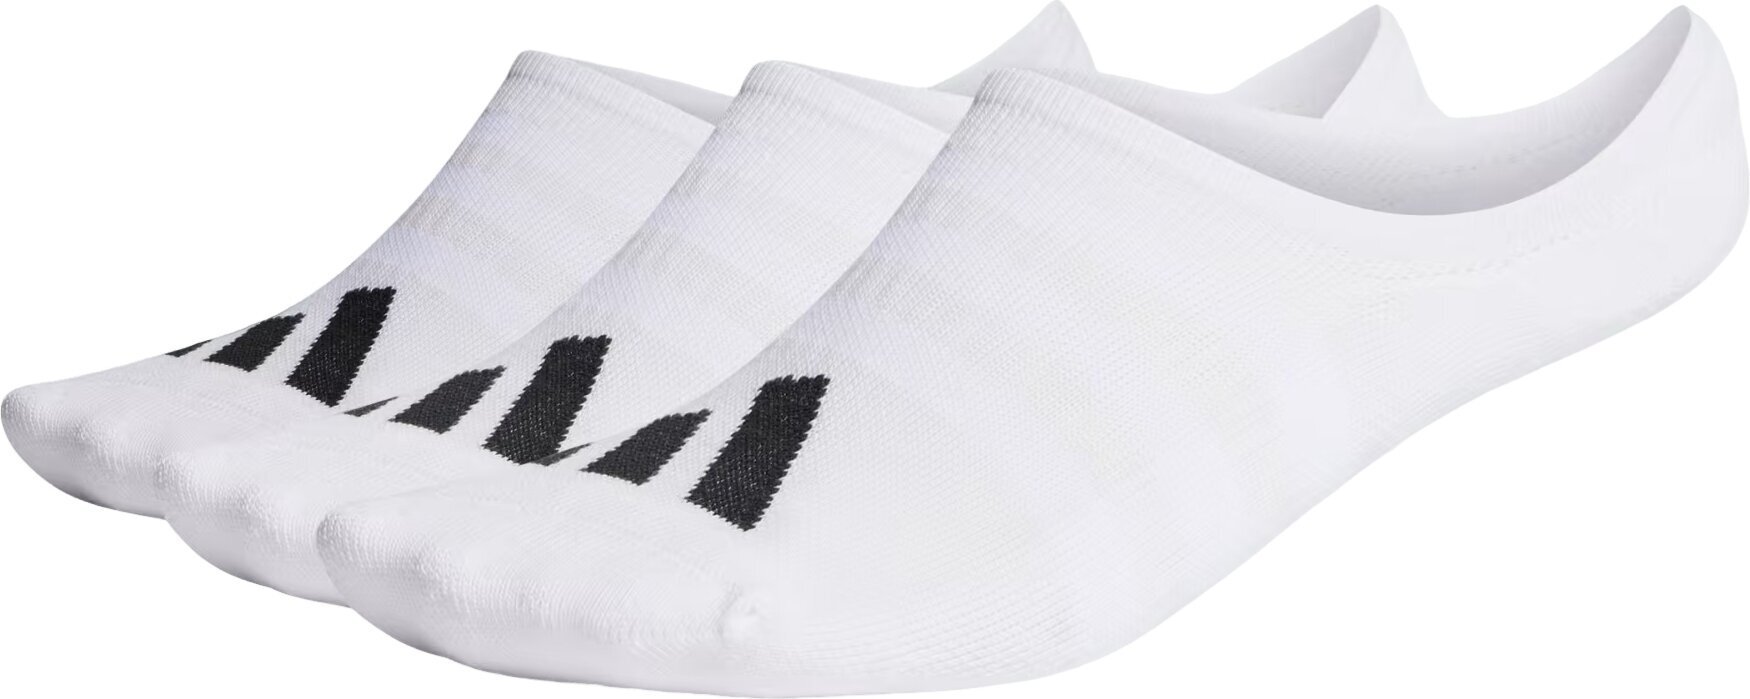 Chaussettes Adidas No Show Golf Socks 3-Pairs Chaussettes White 43-47